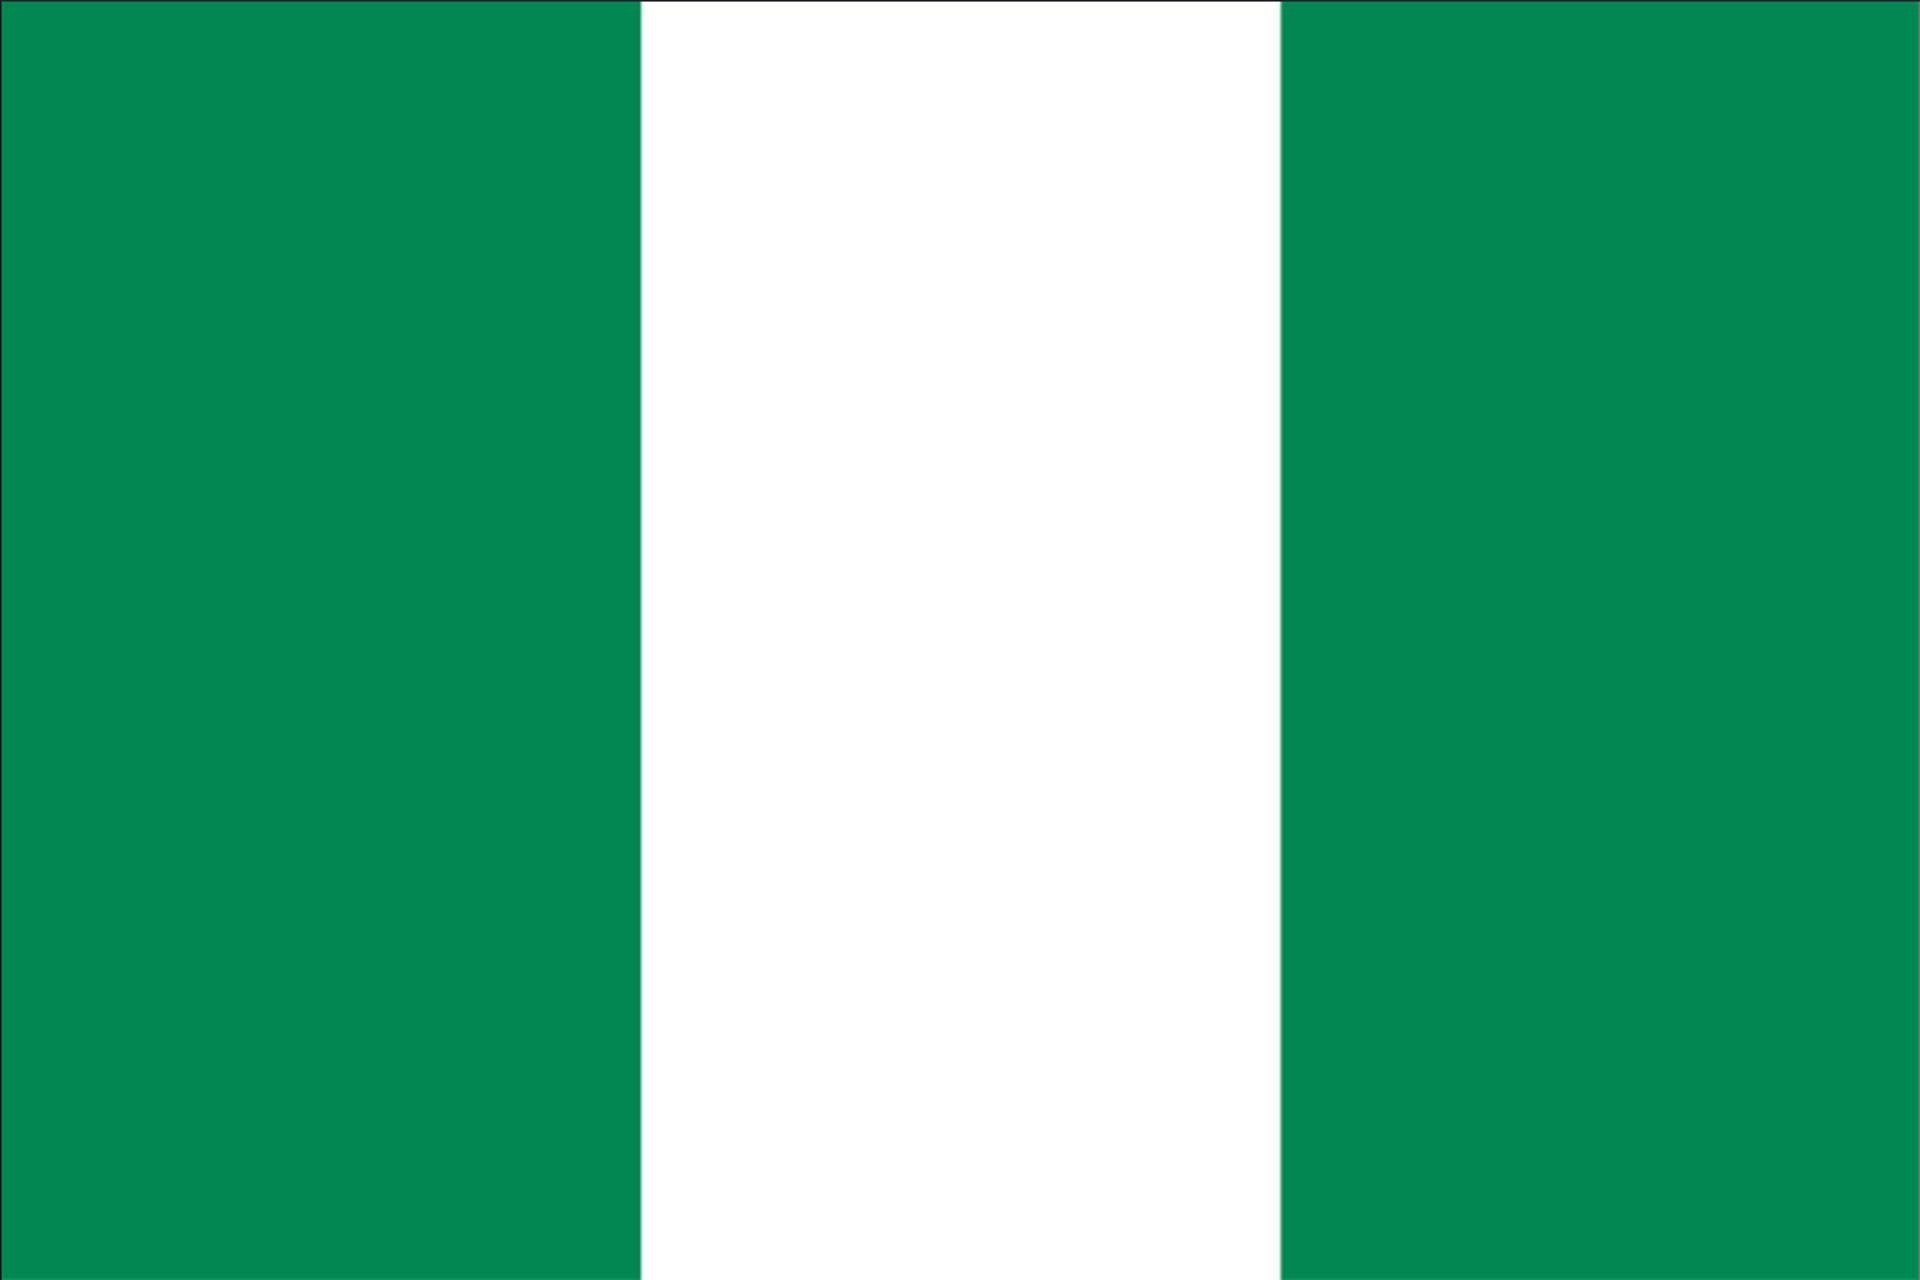 Nigeria flaggenmeer Flagge g/m² 160 Querformat